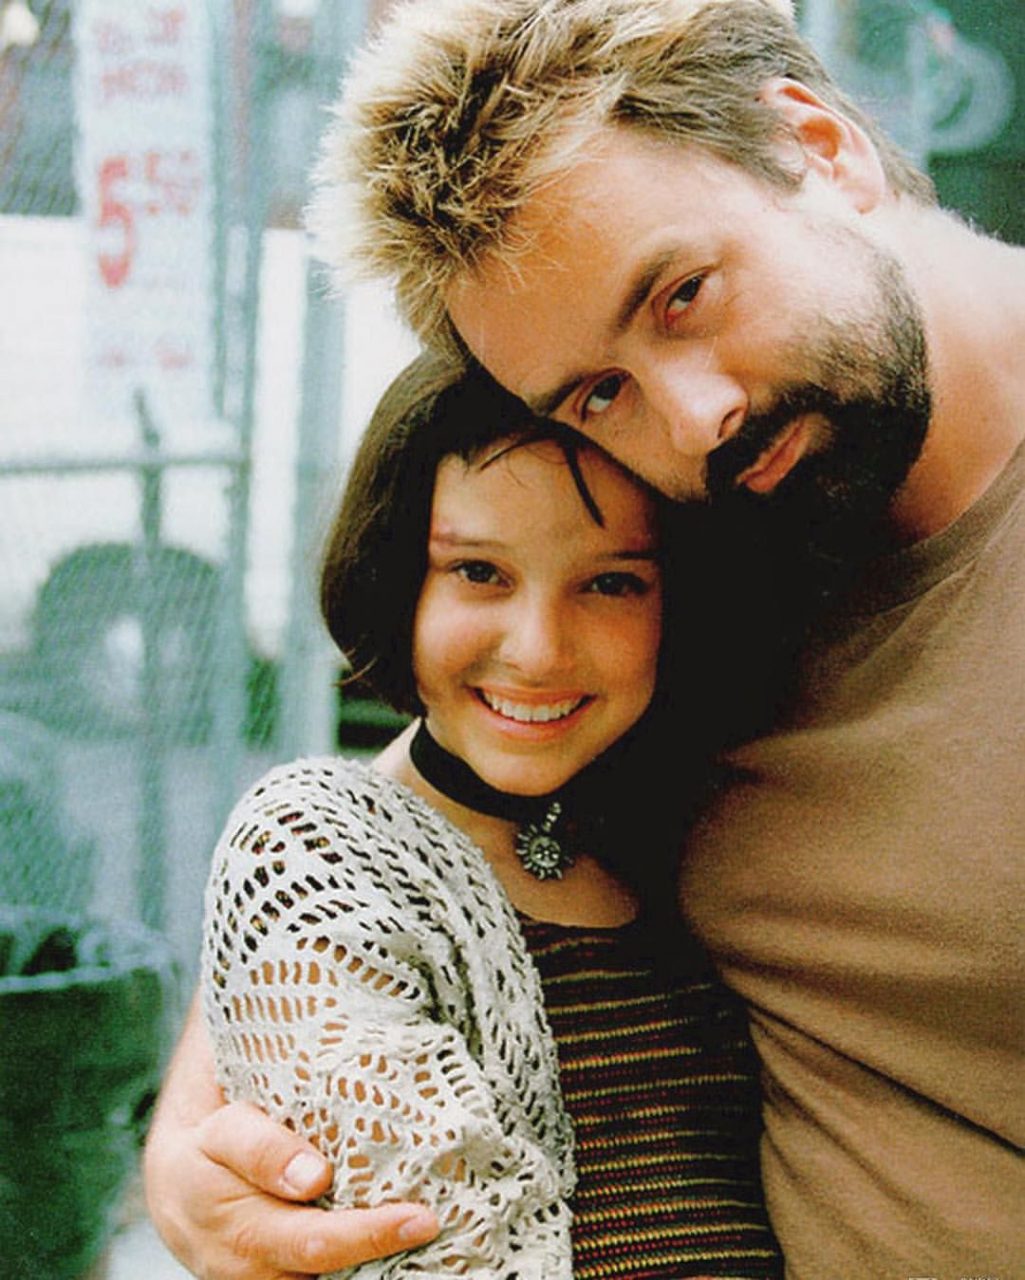 Unseen Childhood Photos Of Natalie Portman With Director Luc Besson